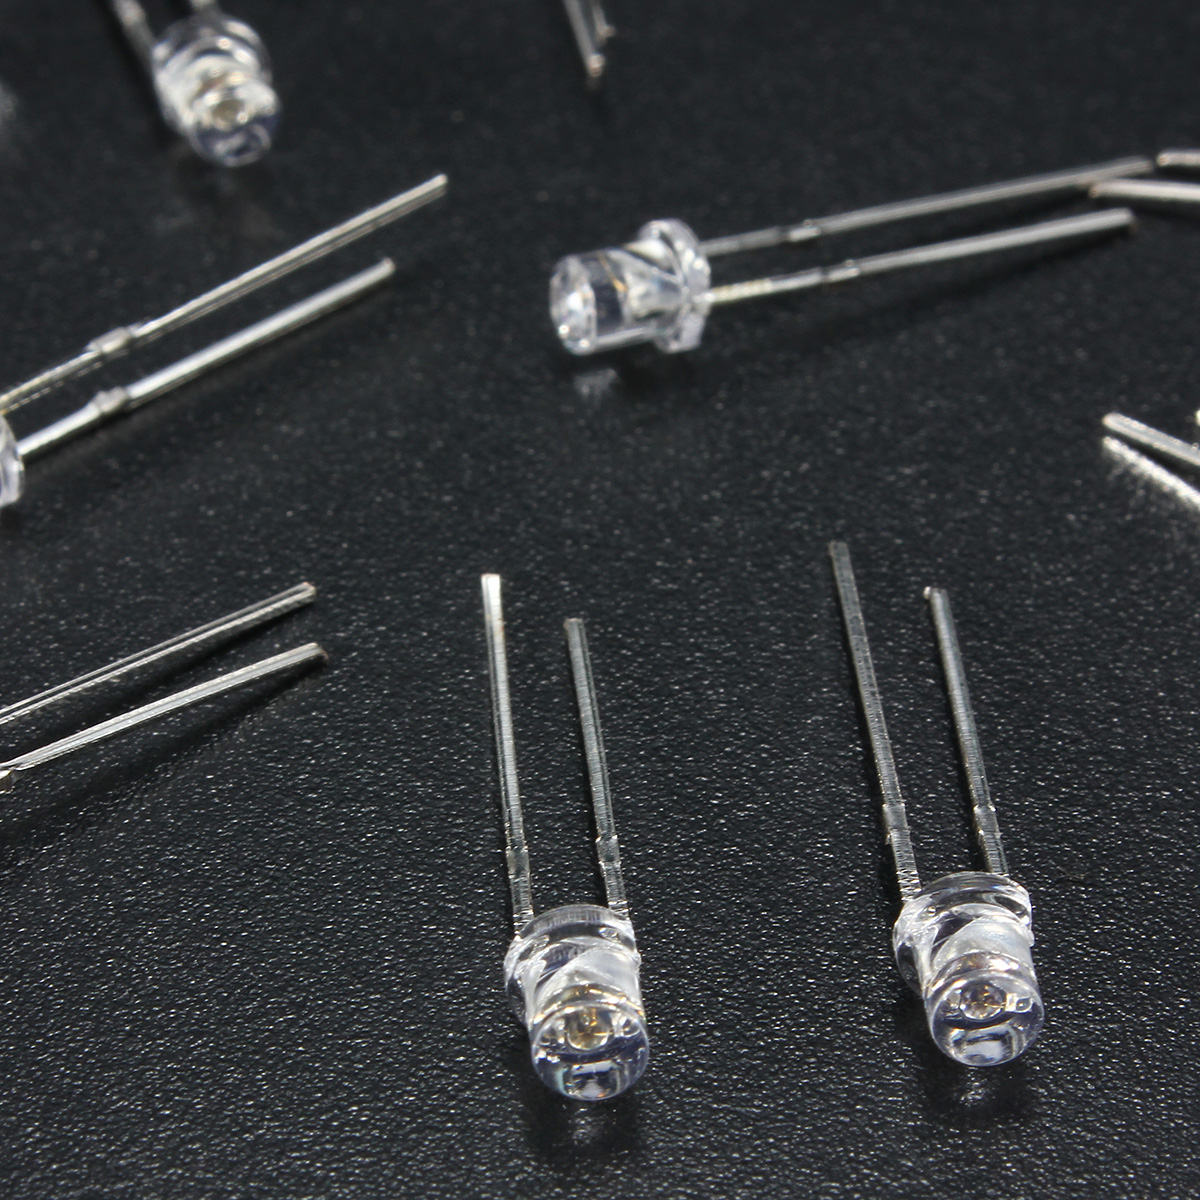 10pcs-3mm-5-Color-Water-Clear-LED-Flat-Diodes-Assortment-Lamp-DIY-1076678